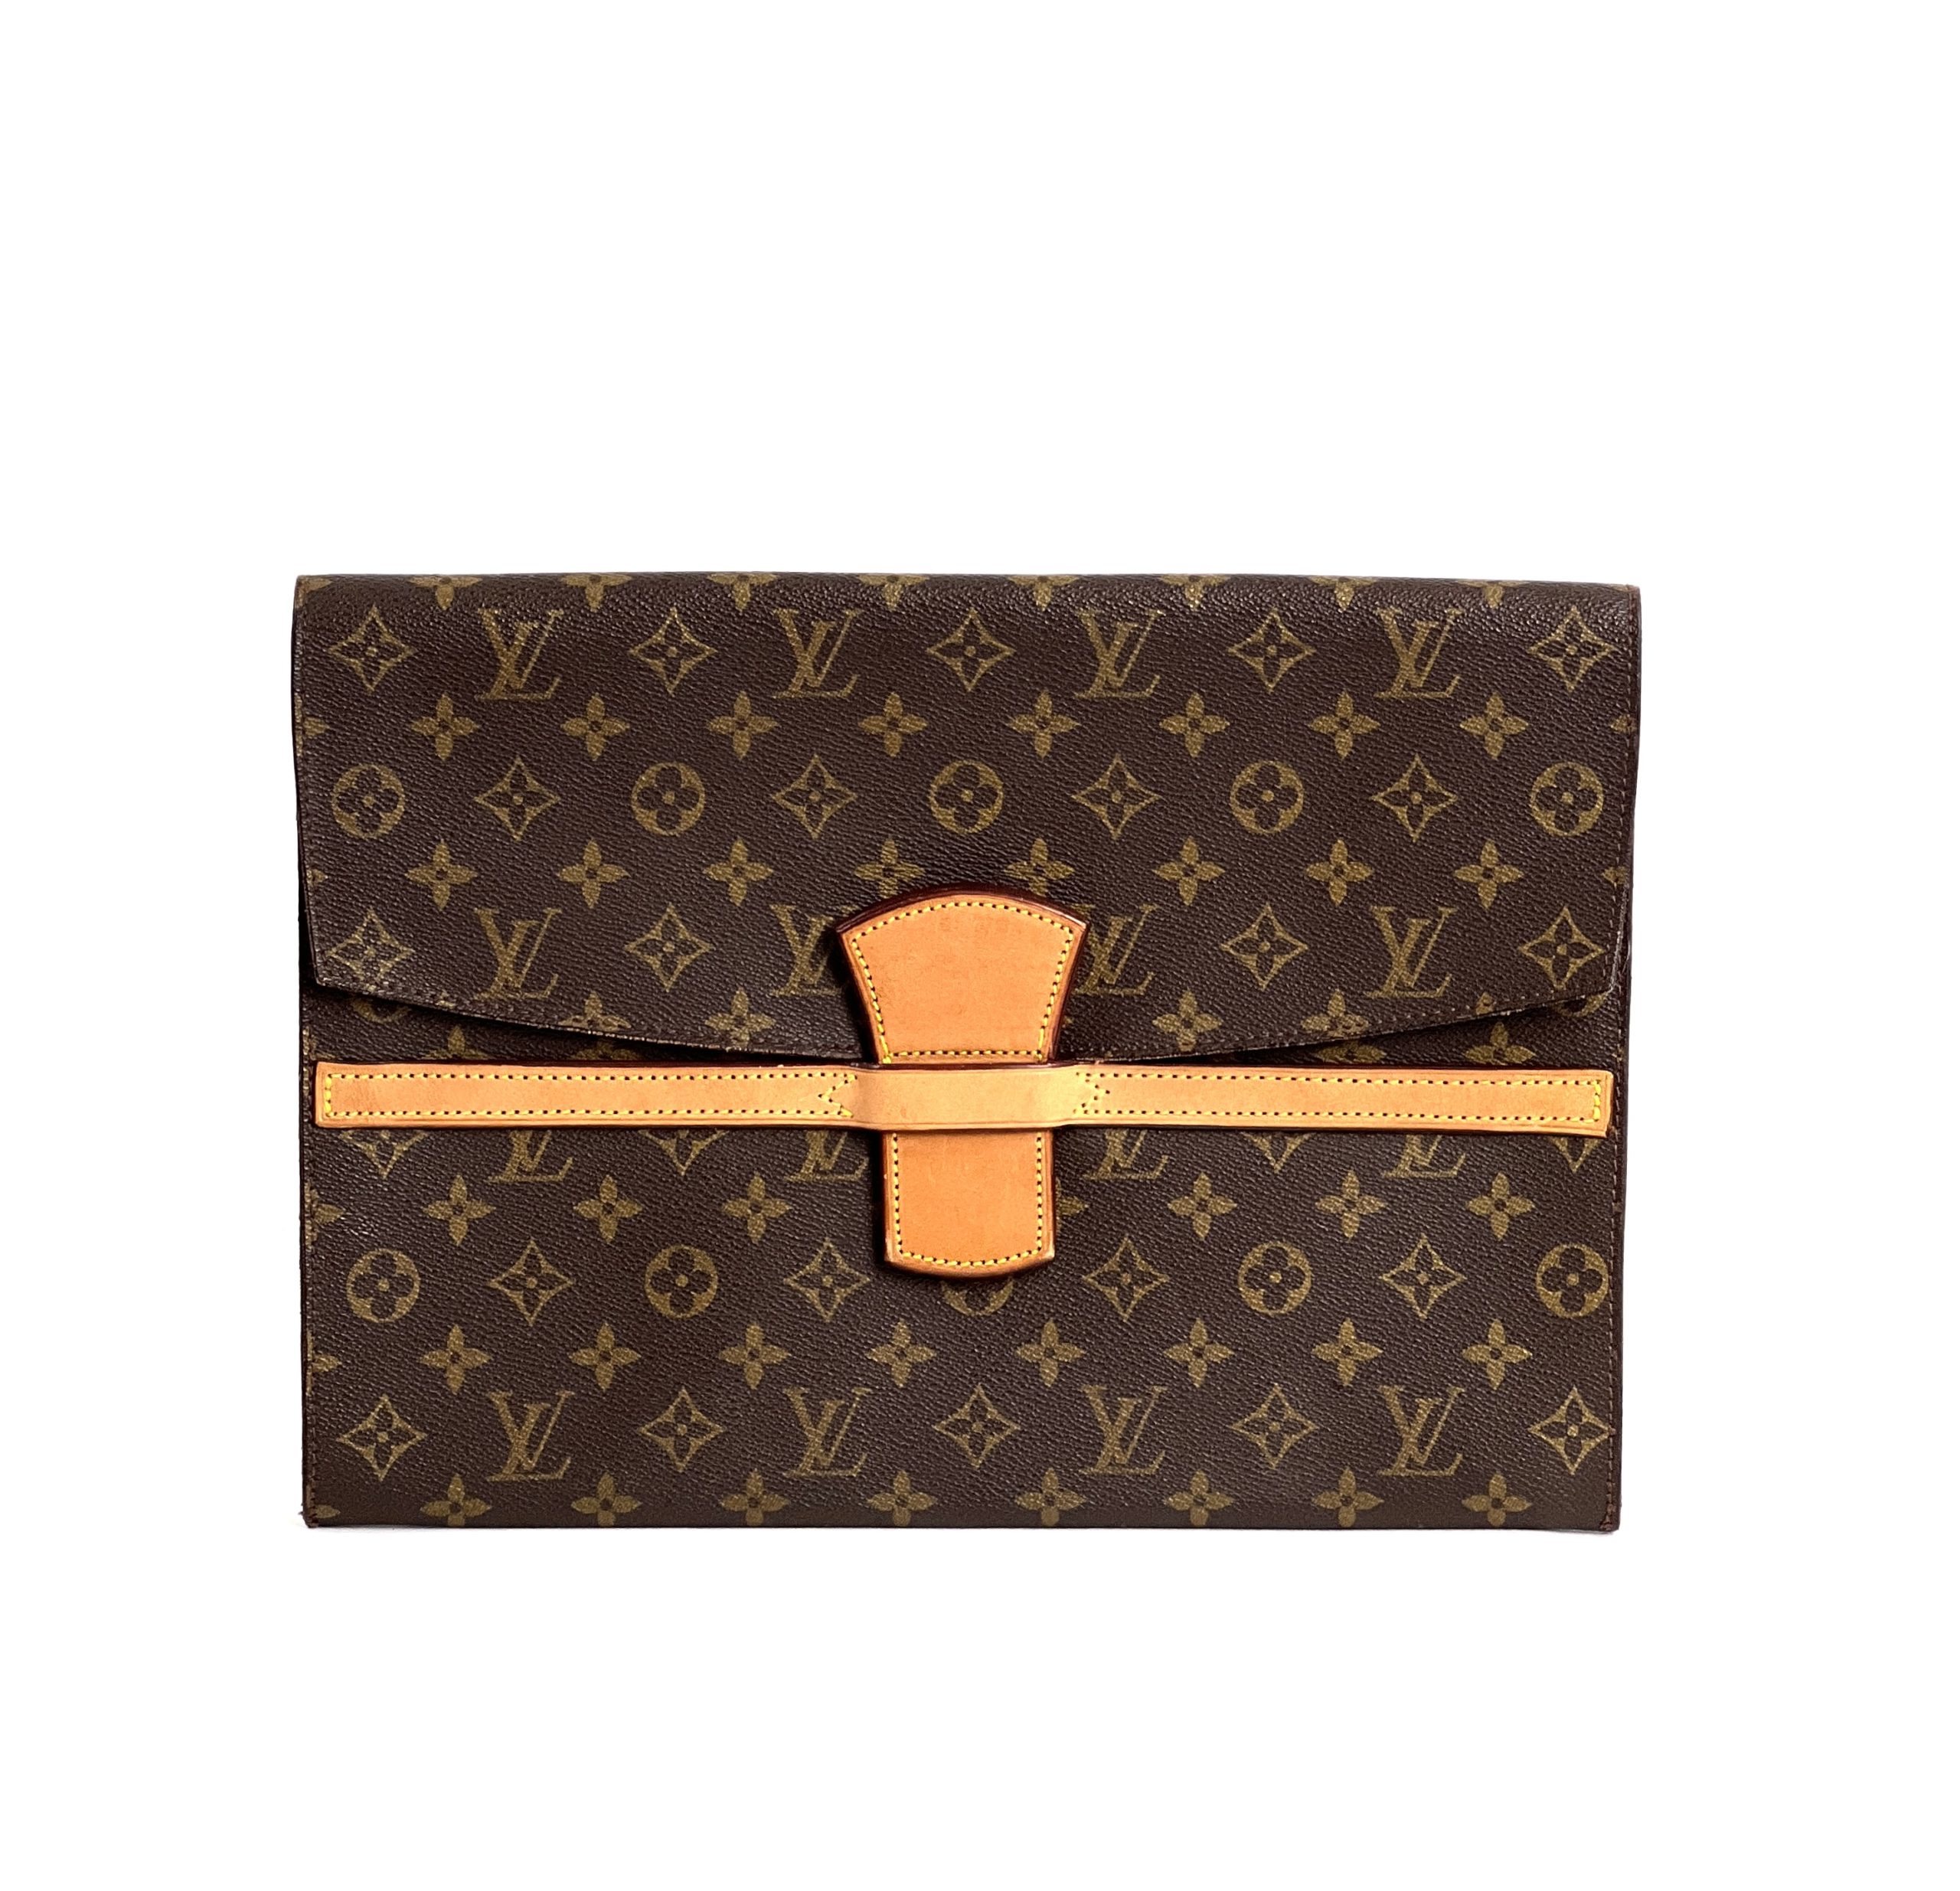 3 Vintage Louis Vuitton bags that HOLD their value: Pochette